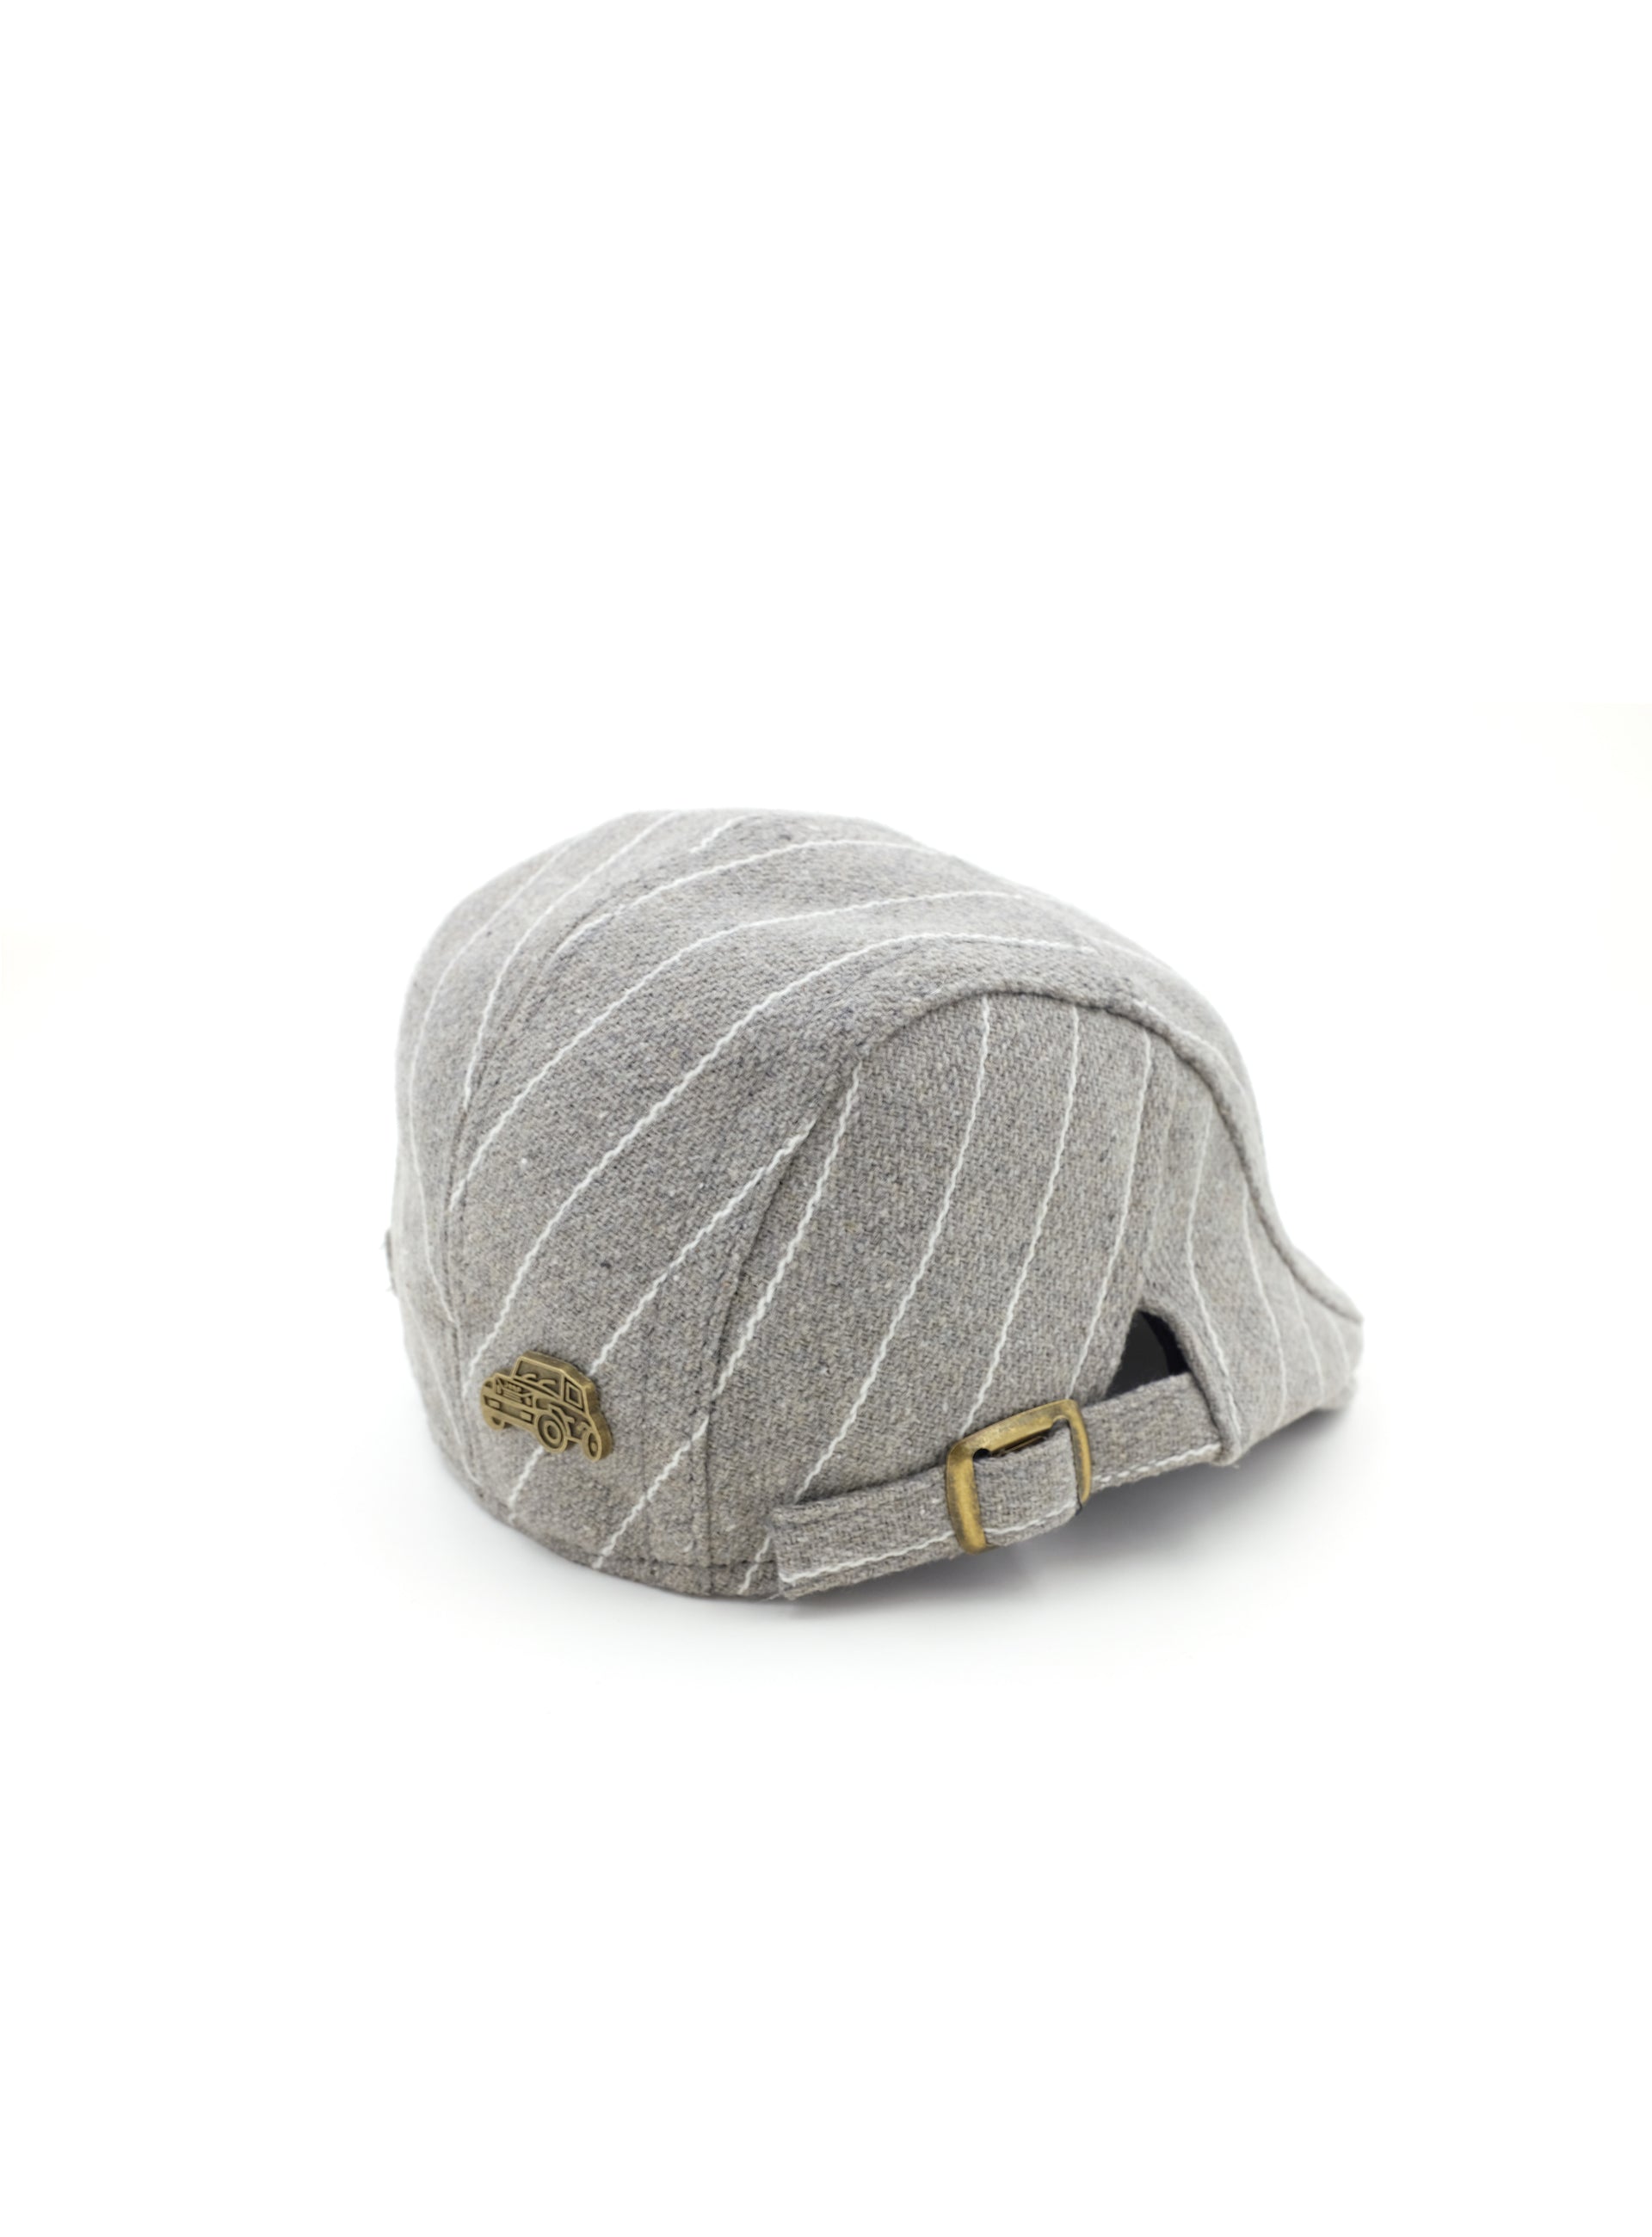 pearl gray flat cap with white lines pattern